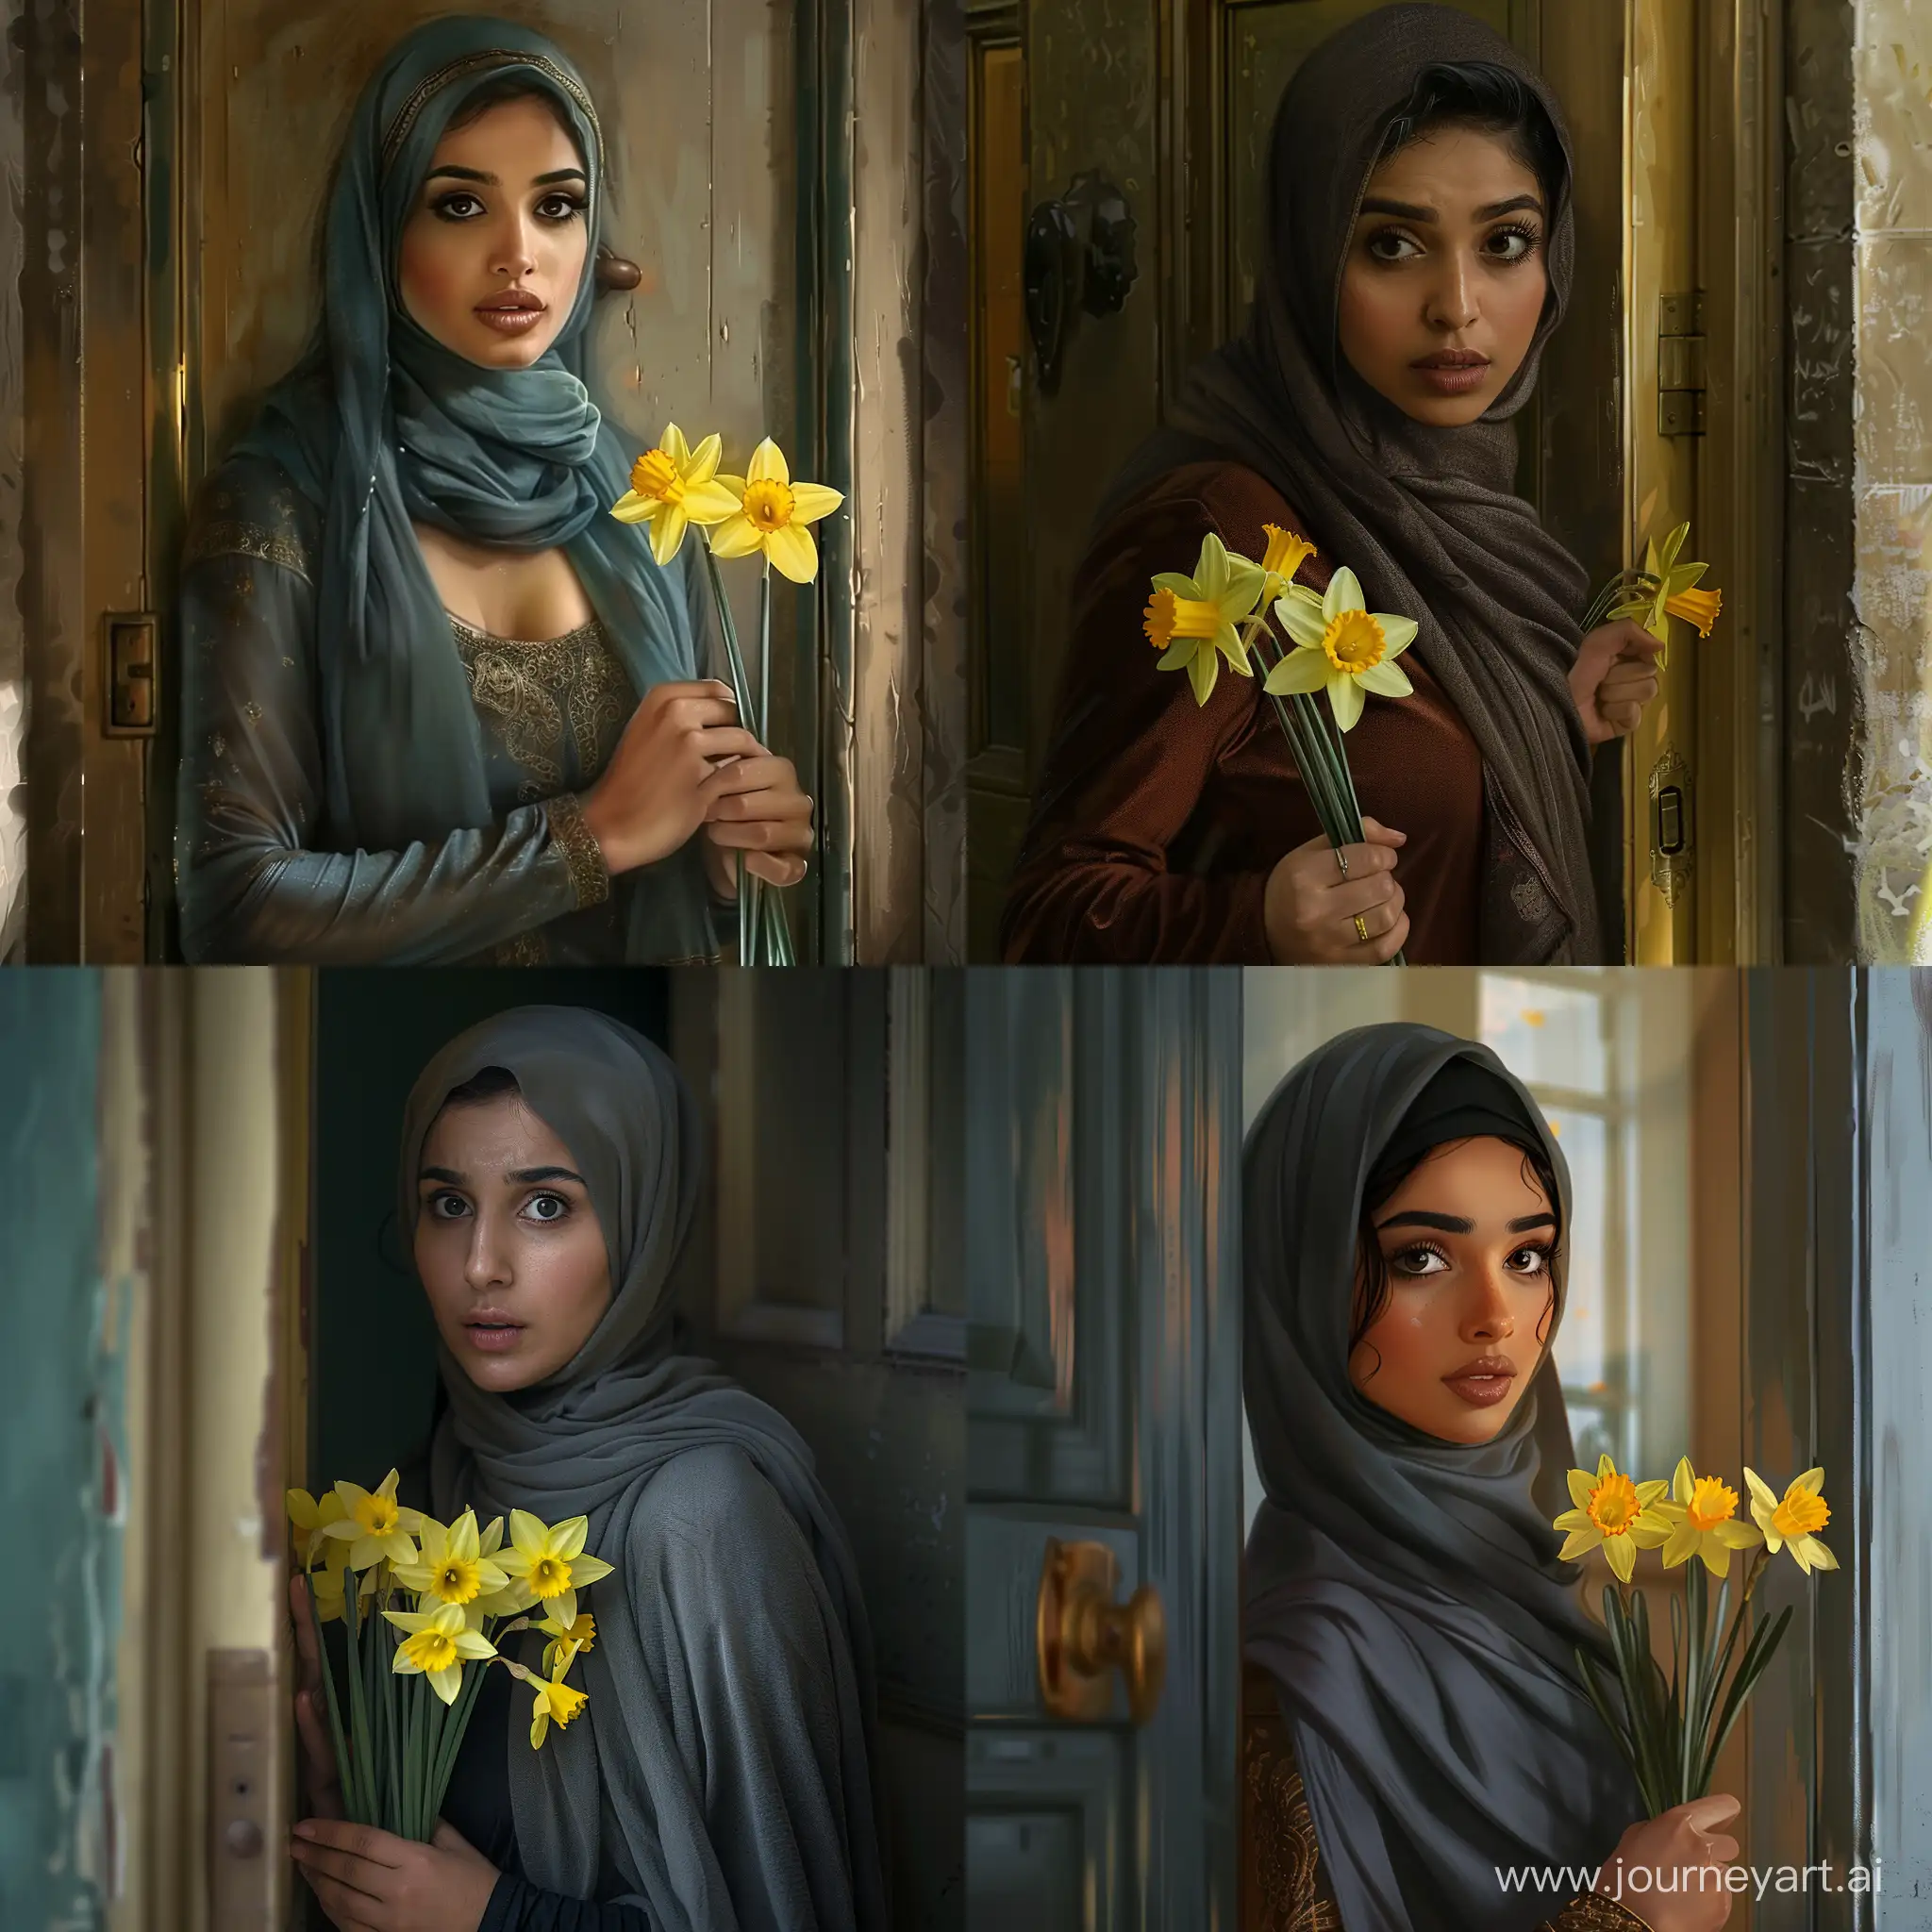 Anxious-Arab-Woman-Holding-Daffodils-by-the-Door